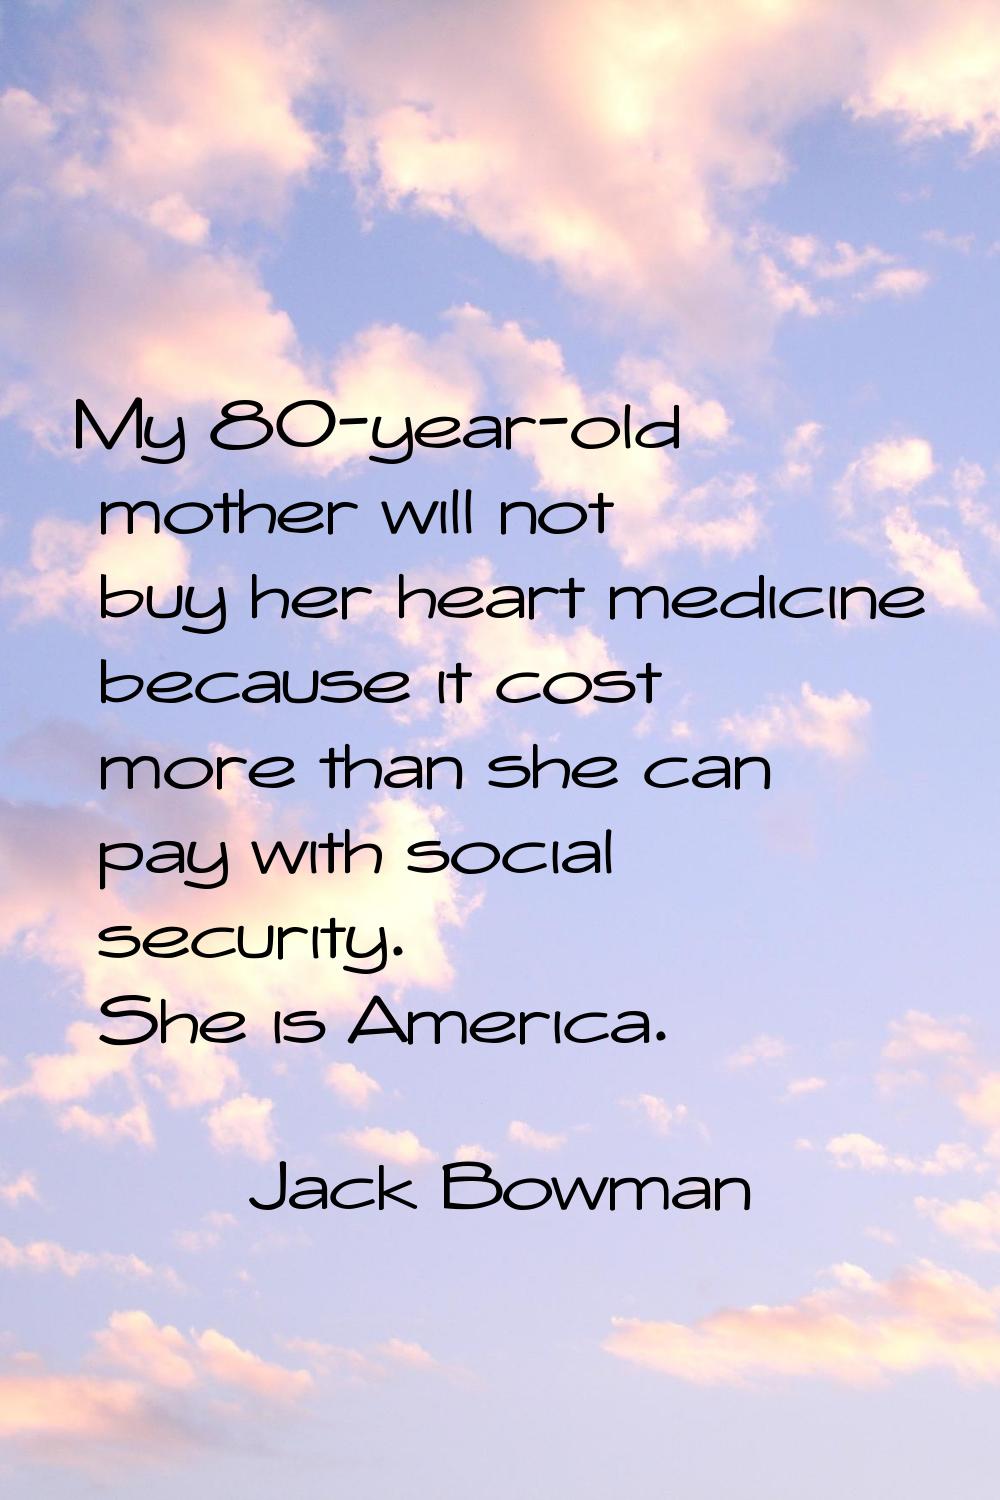 My 80-year-old mother will not buy her heart medicine because it cost more than she can pay with so